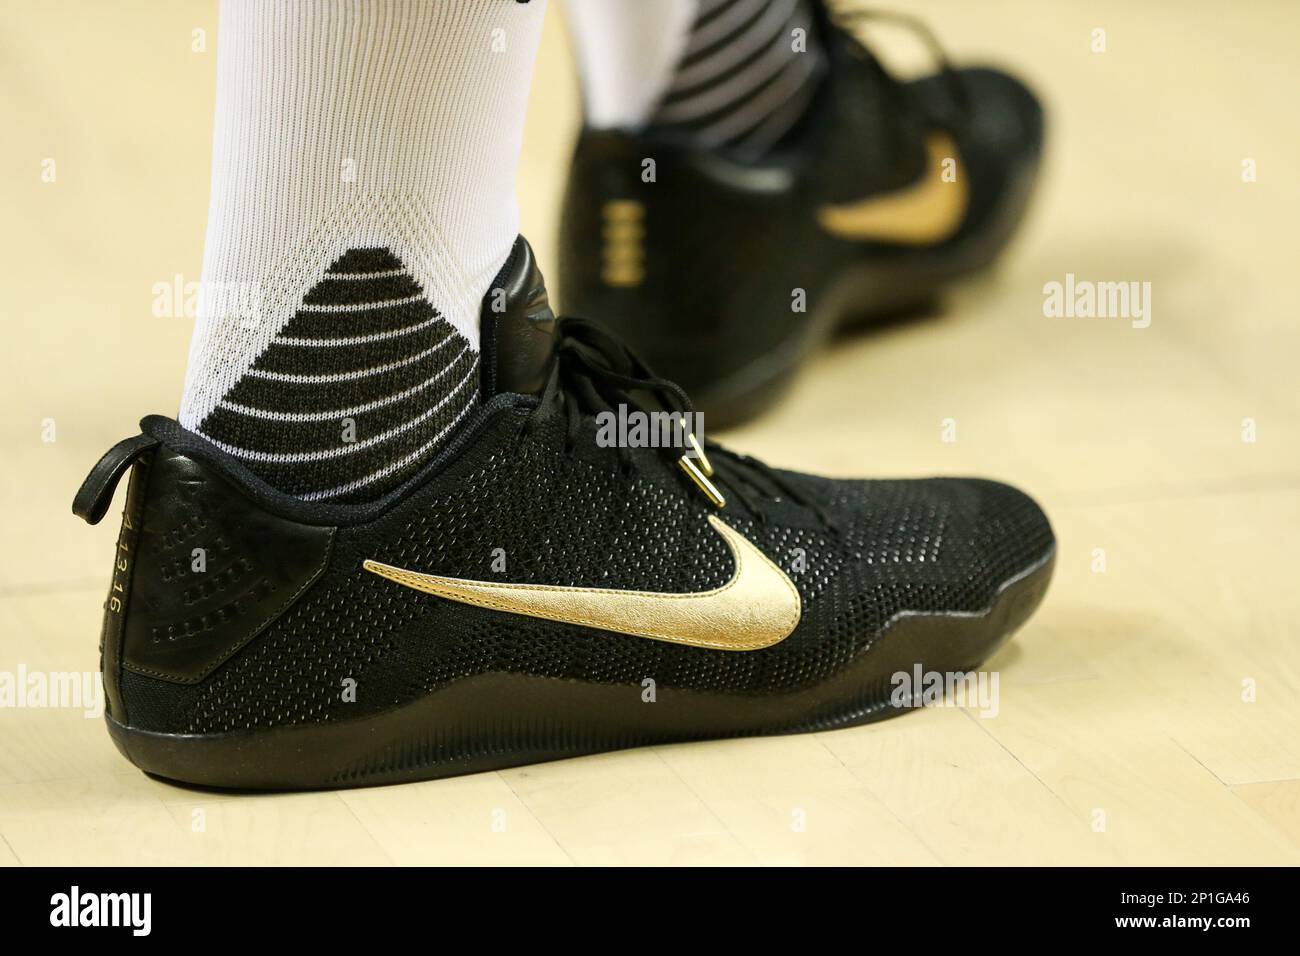 April 13, 2016 - Players wear a special players edition of the Nike Kobe 11  on Kobe Bryant's last game.The Portland Trail Blazers hosted the Denver  Nuggets at the Moda Center on